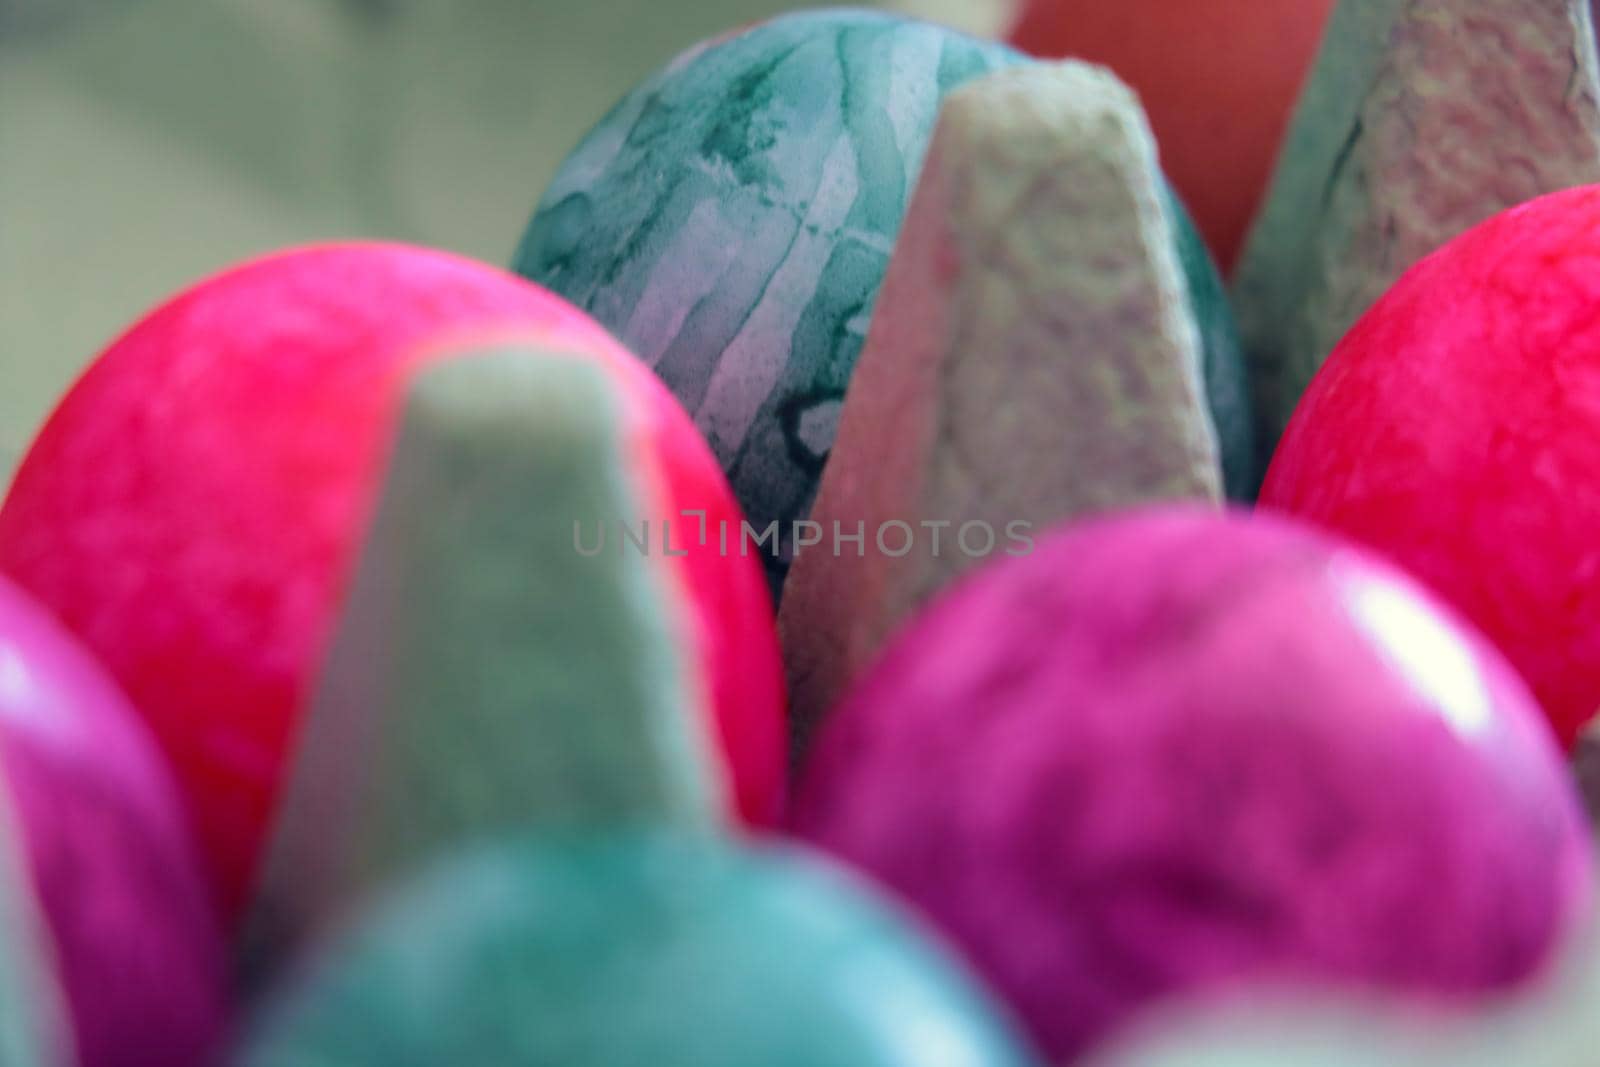 Out of focus. Blurred background. Colored eggs in a box